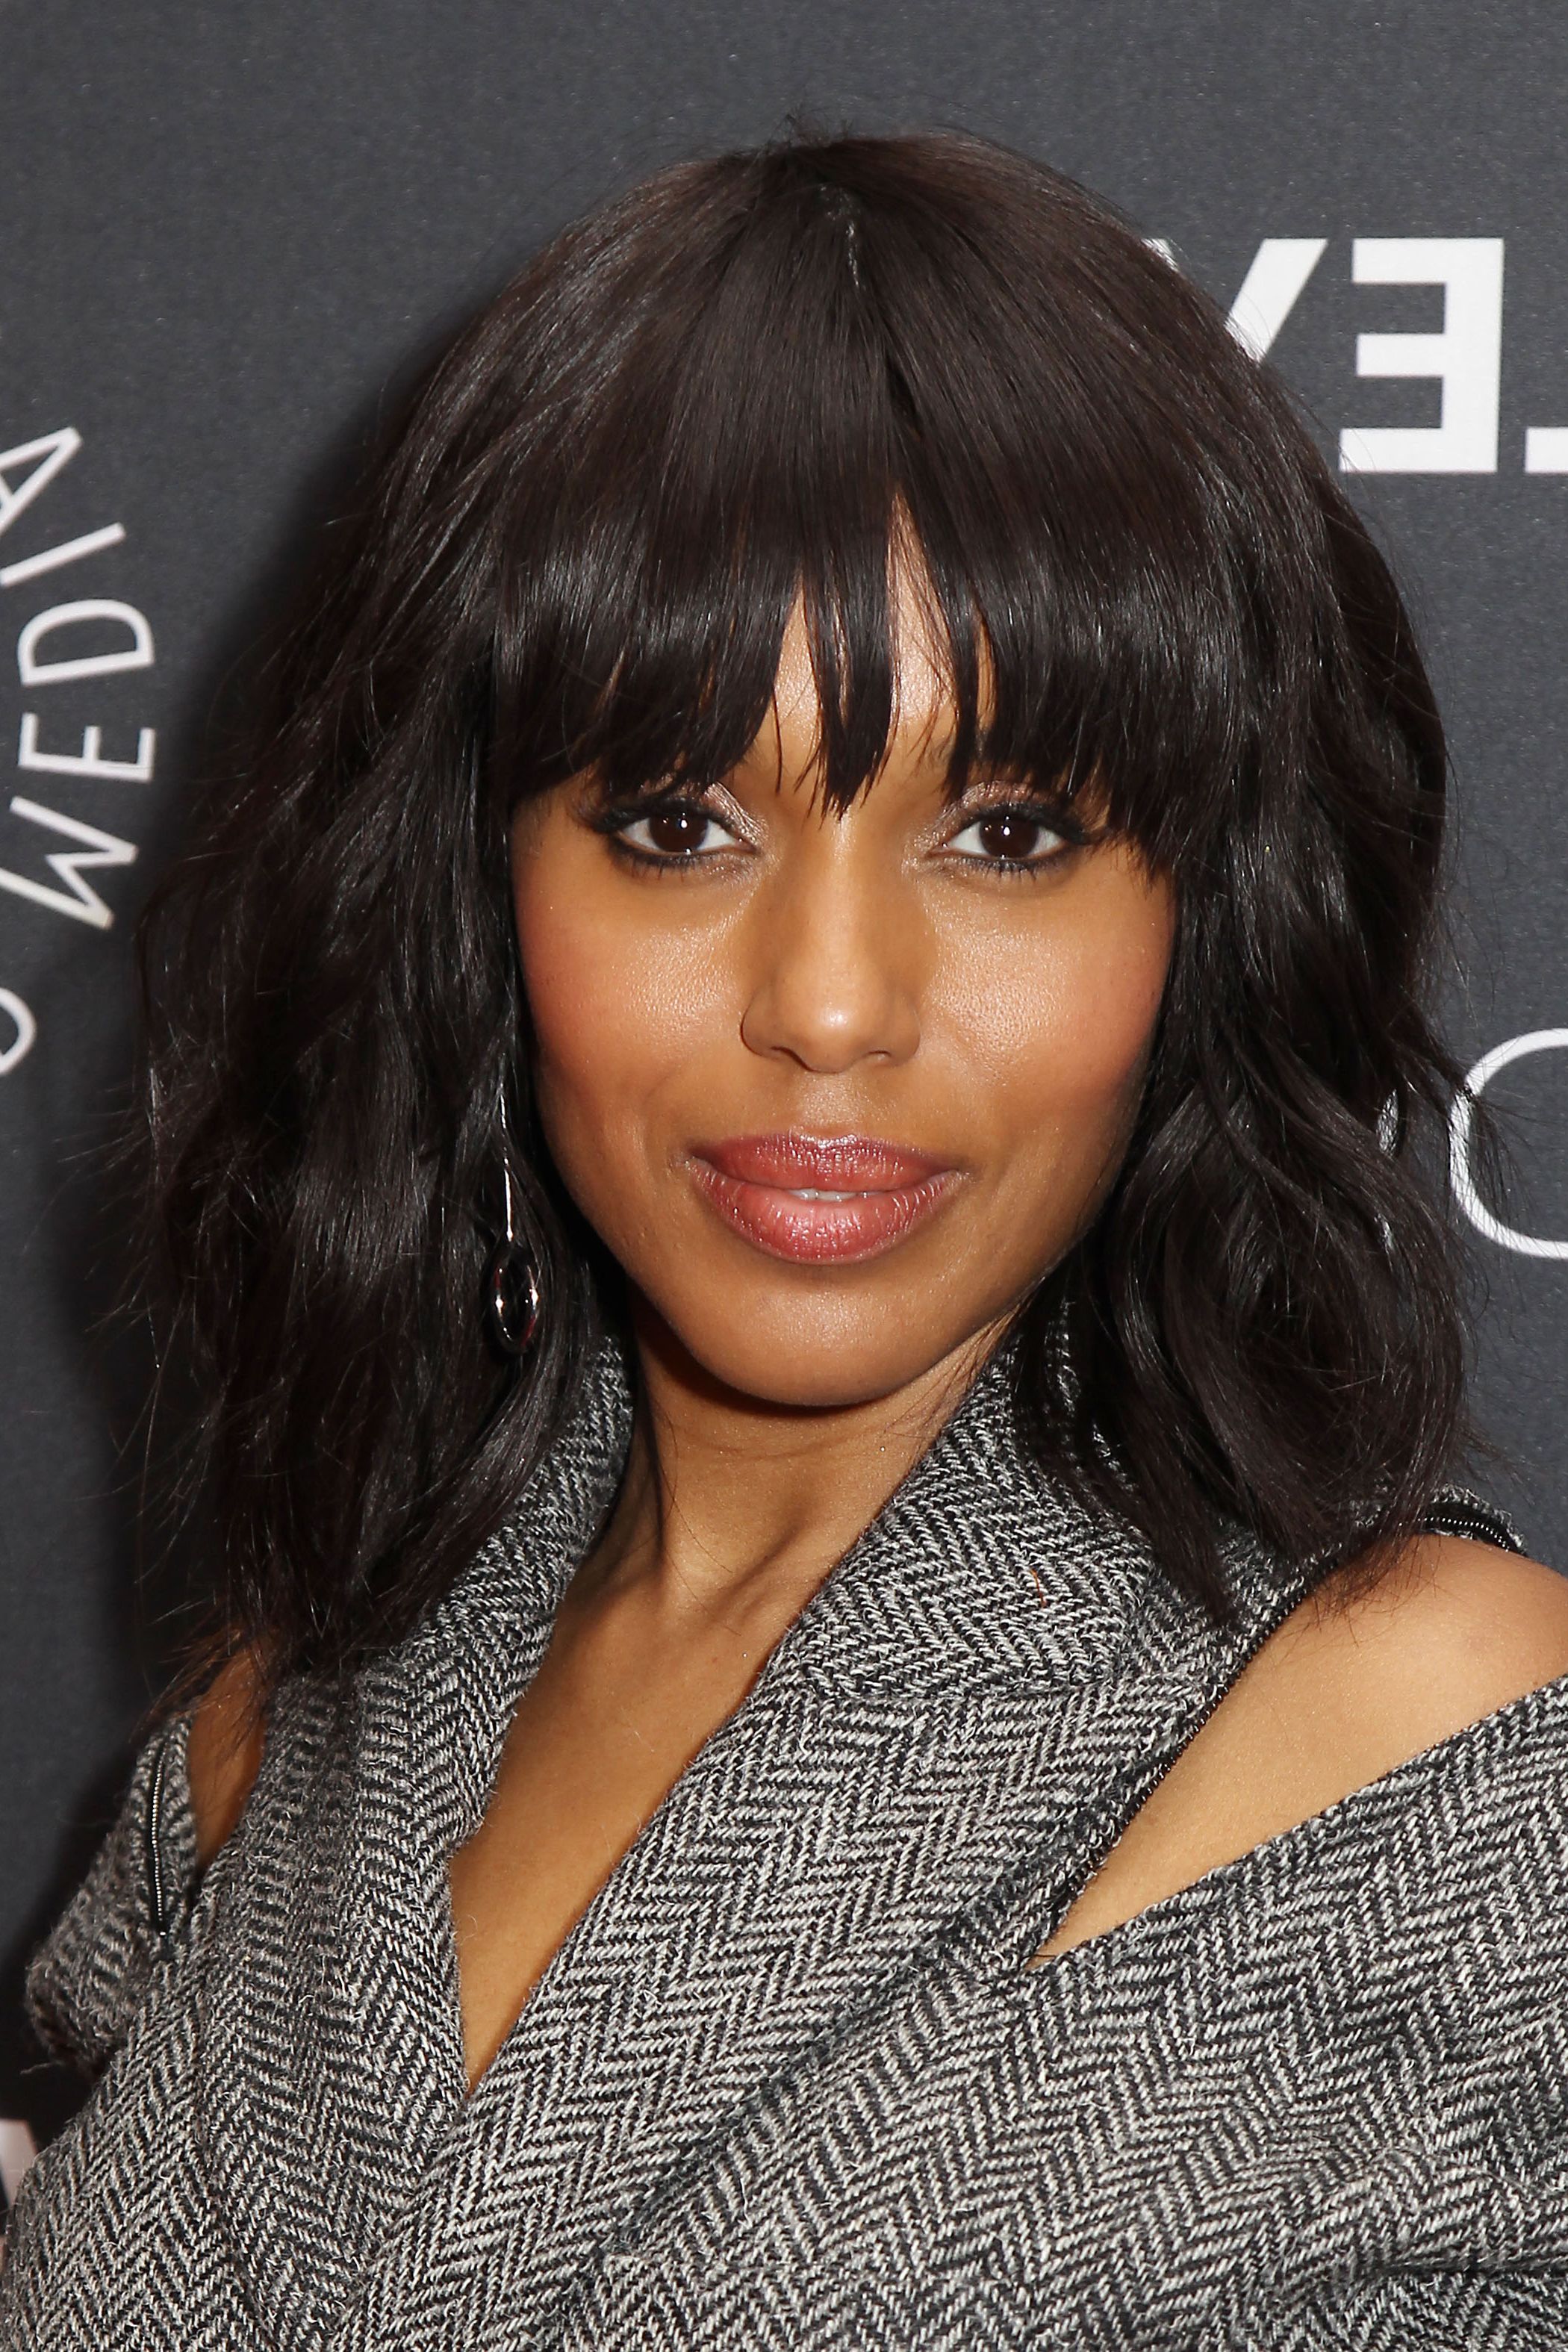 Well Liked Wavy Lob With Choppy Bangs In Wavy Hair With Bangs: 7 Star Studded Looks To Try Now (View 8 of 15)